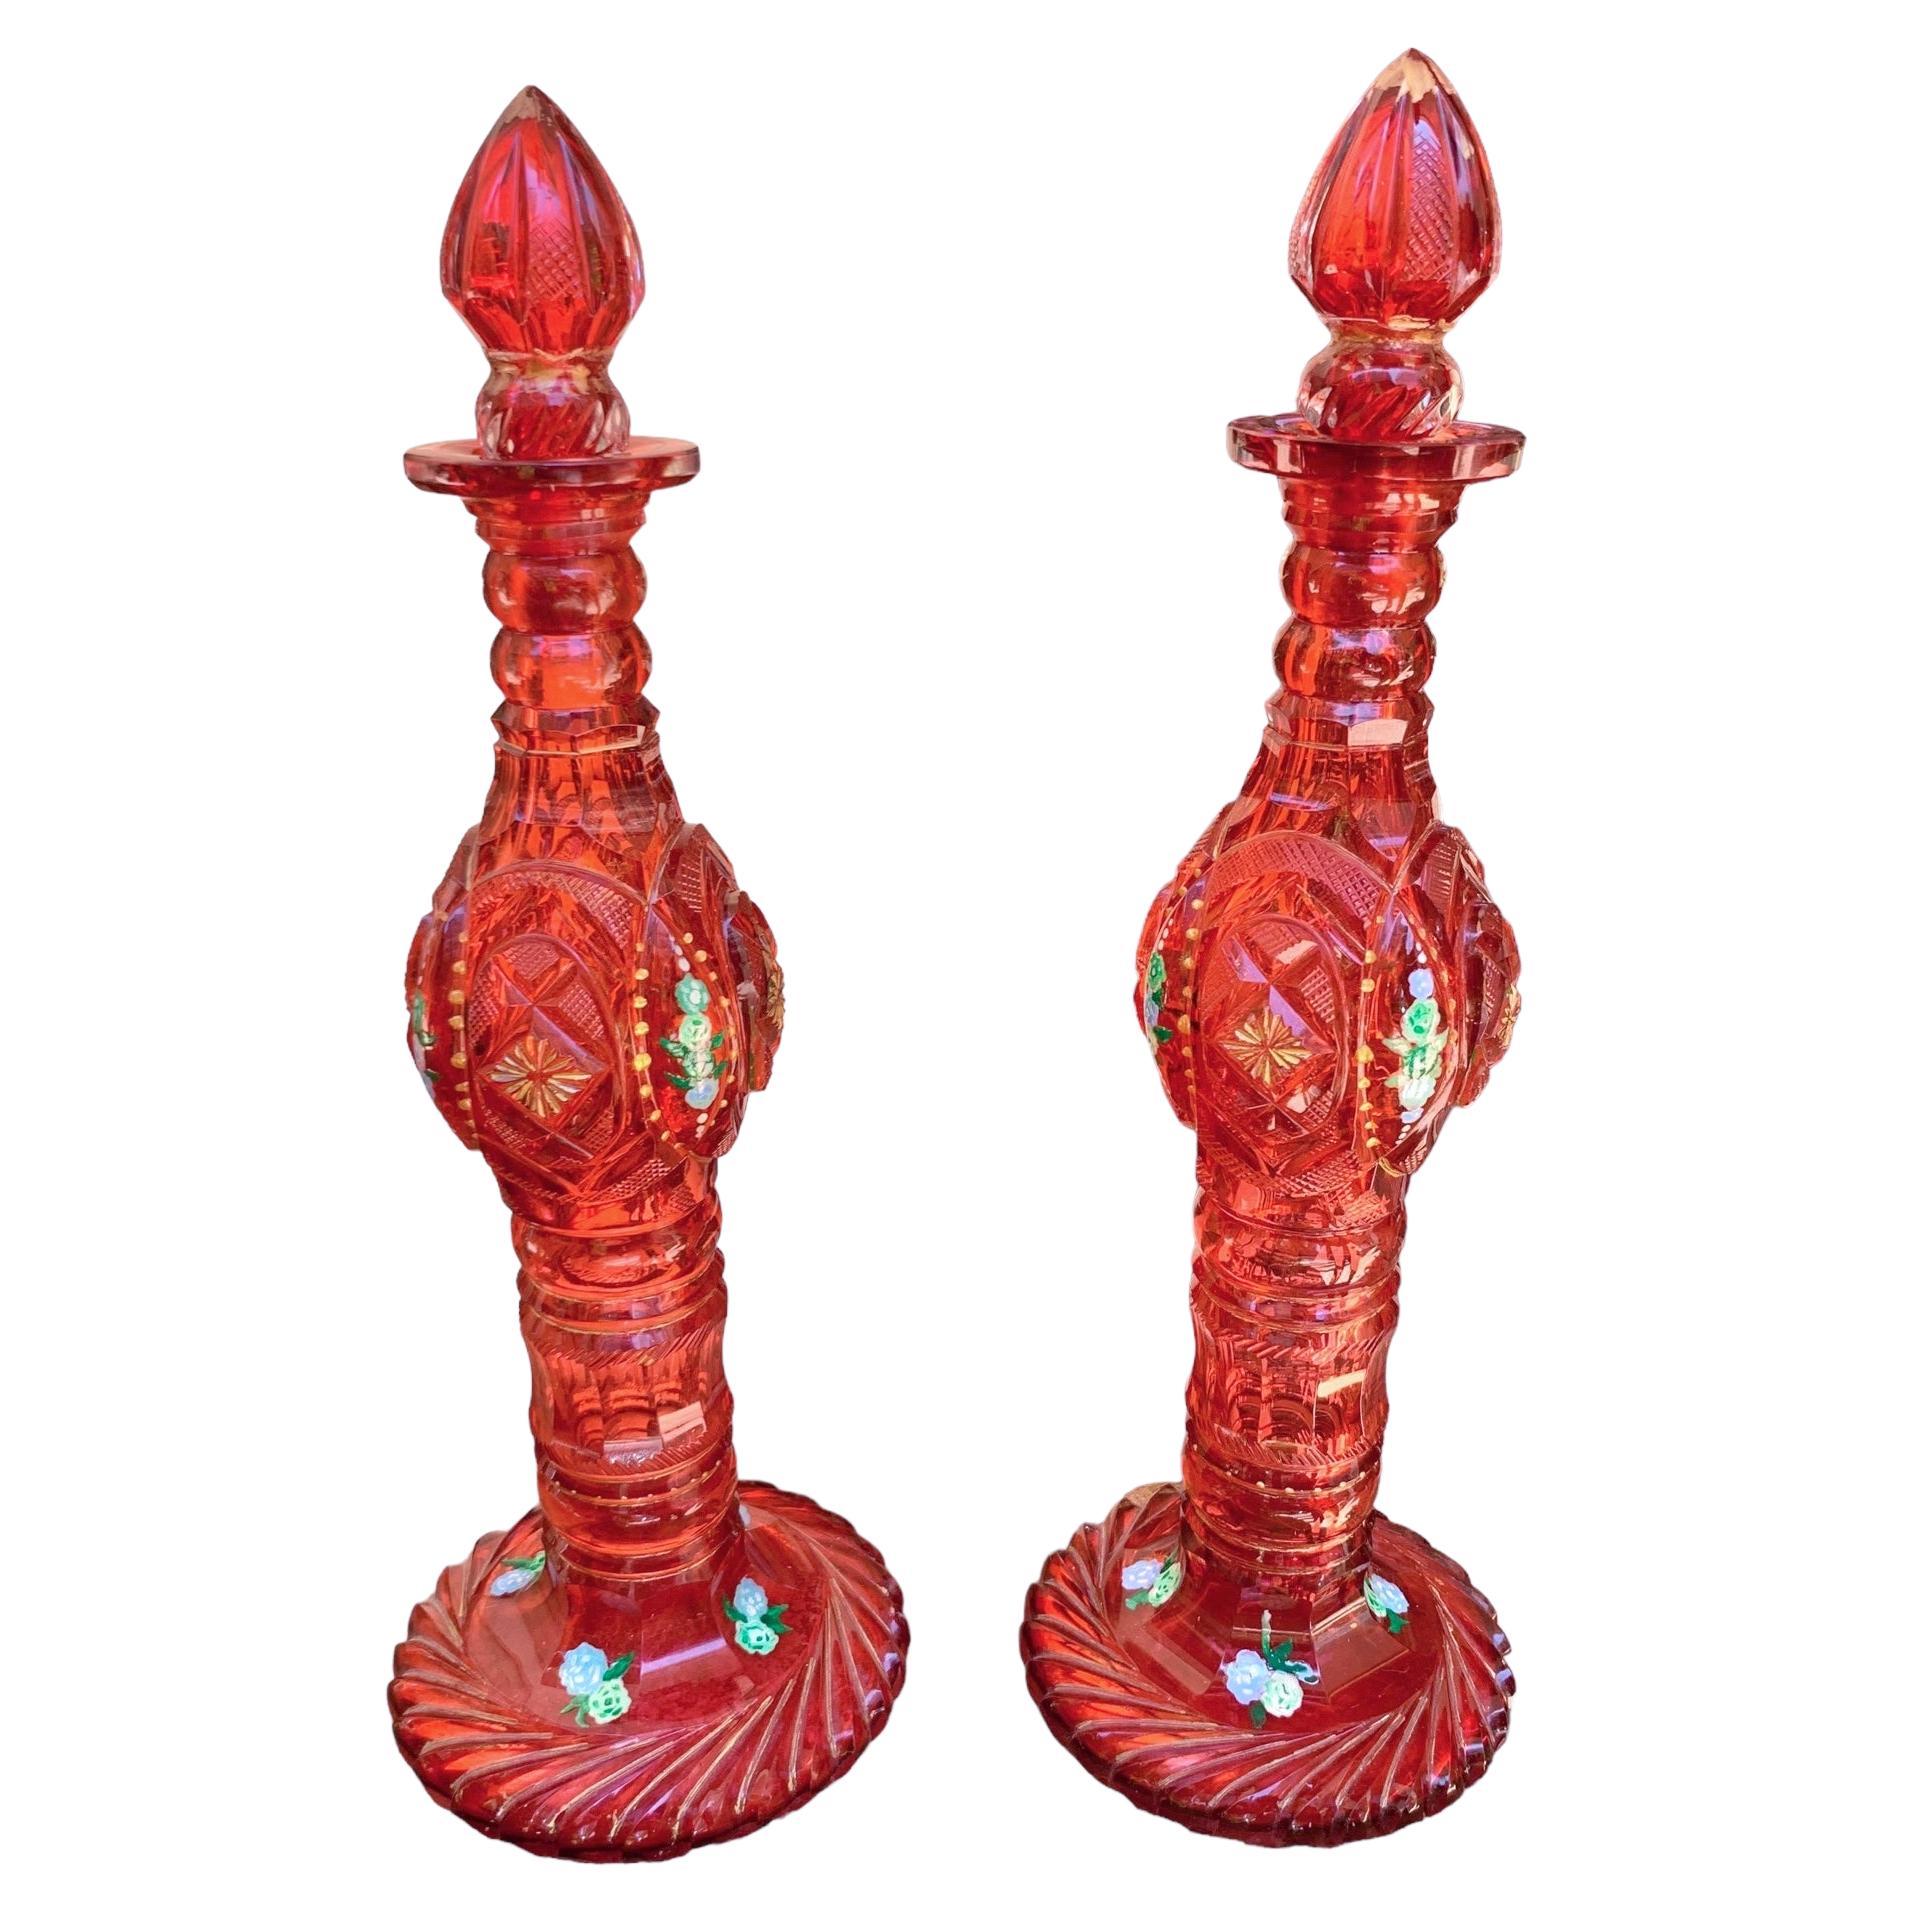 Stunning pair of decanters in cranberry cut glass

Deep-cut all around in decaorative shapes and patterns

Brilliant hand-work, a fine example of the highest quality antique Bohemian glass

Bohemia, 19th Century

Height 29 cm